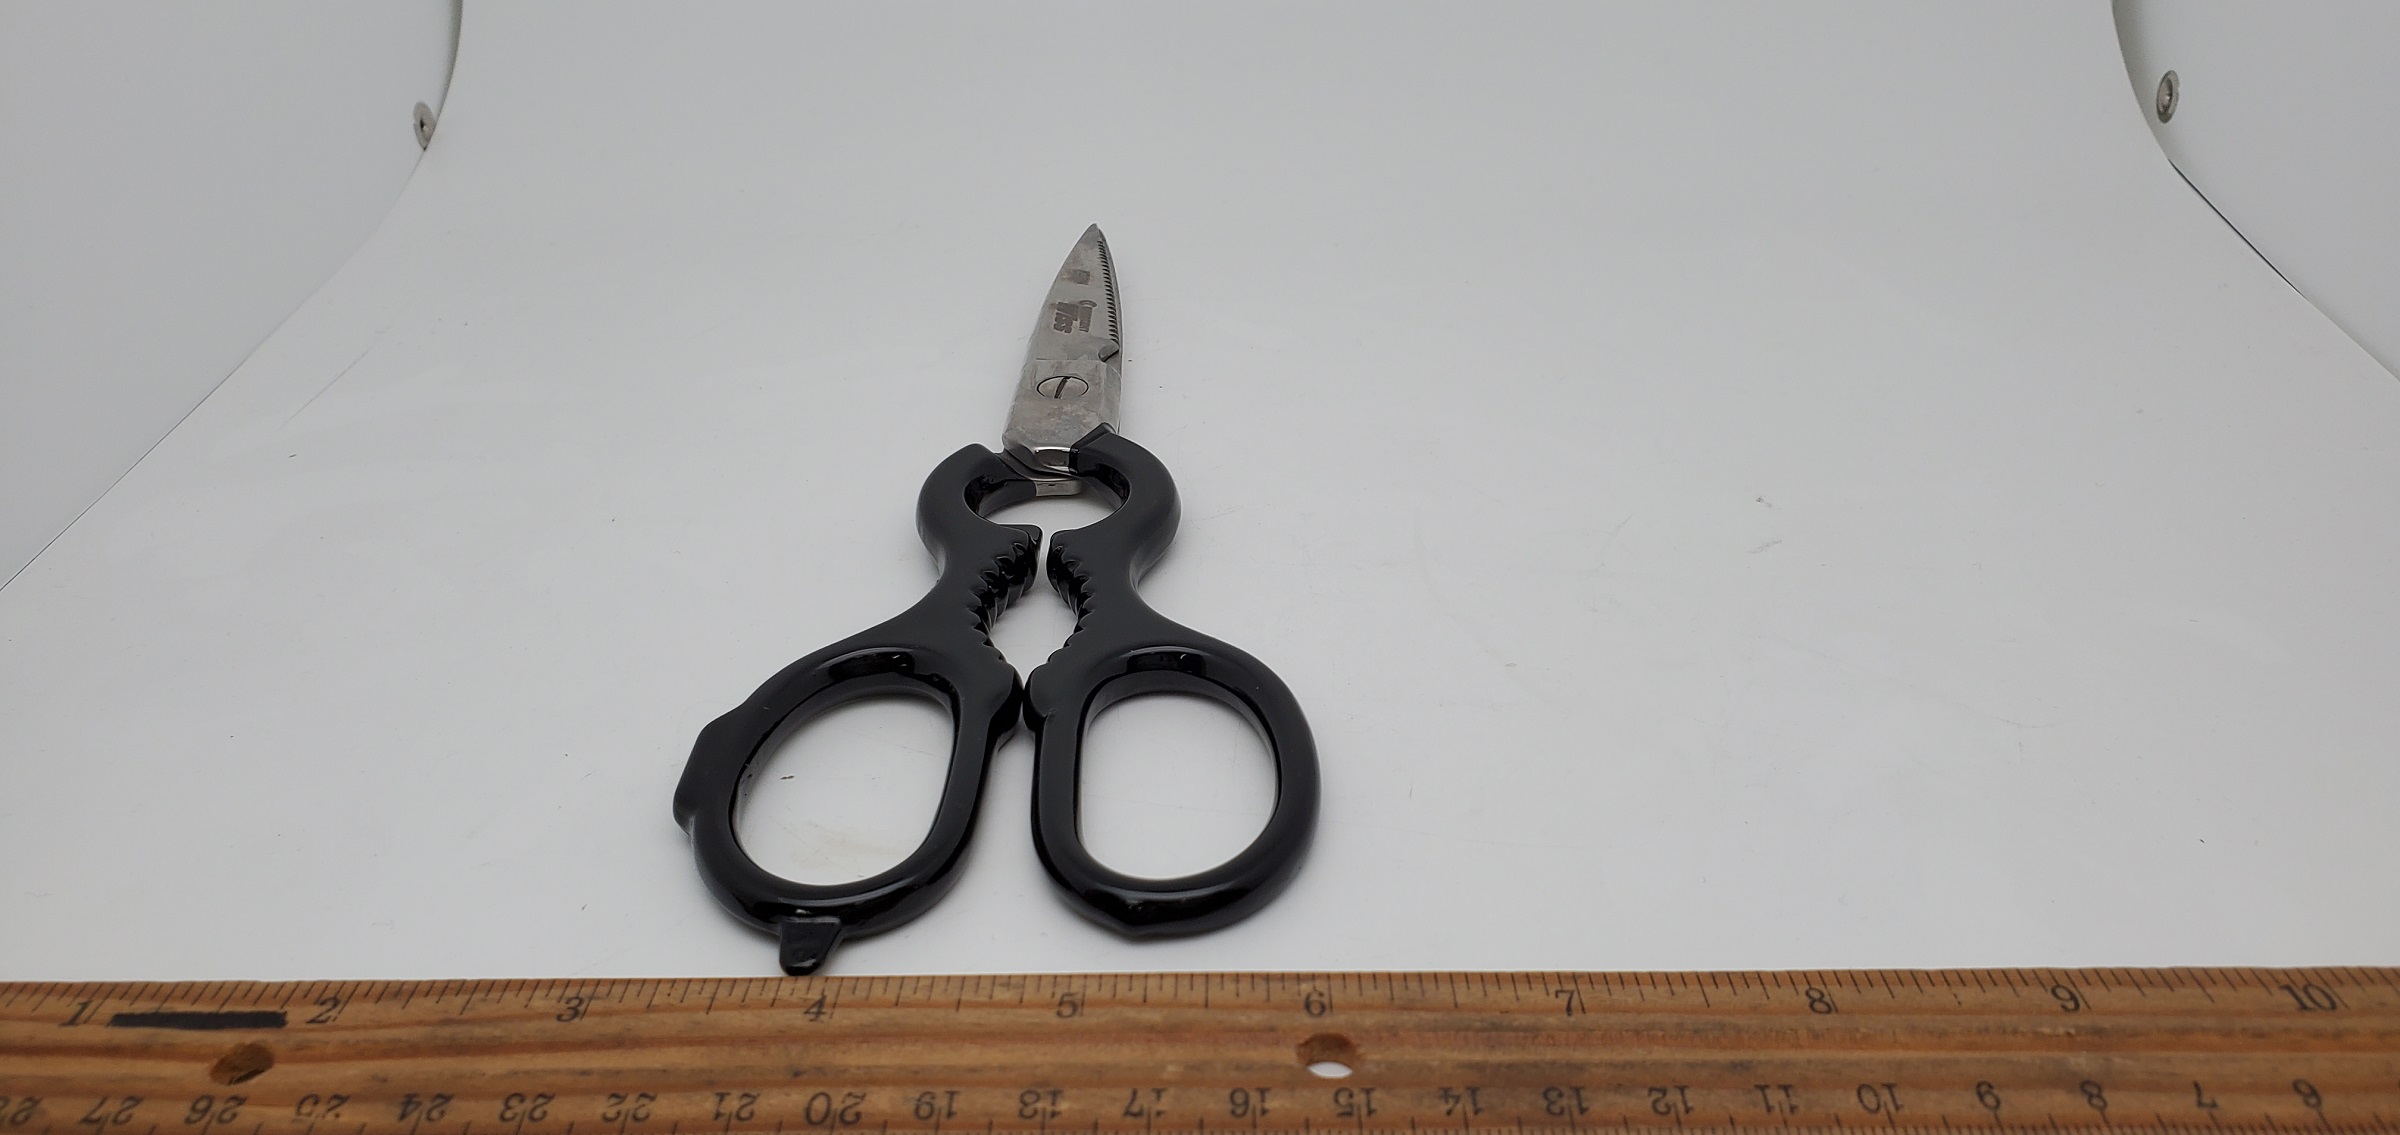 Reserved GIANT Shears Vintage Steel Forged Wiss Scissors No 22